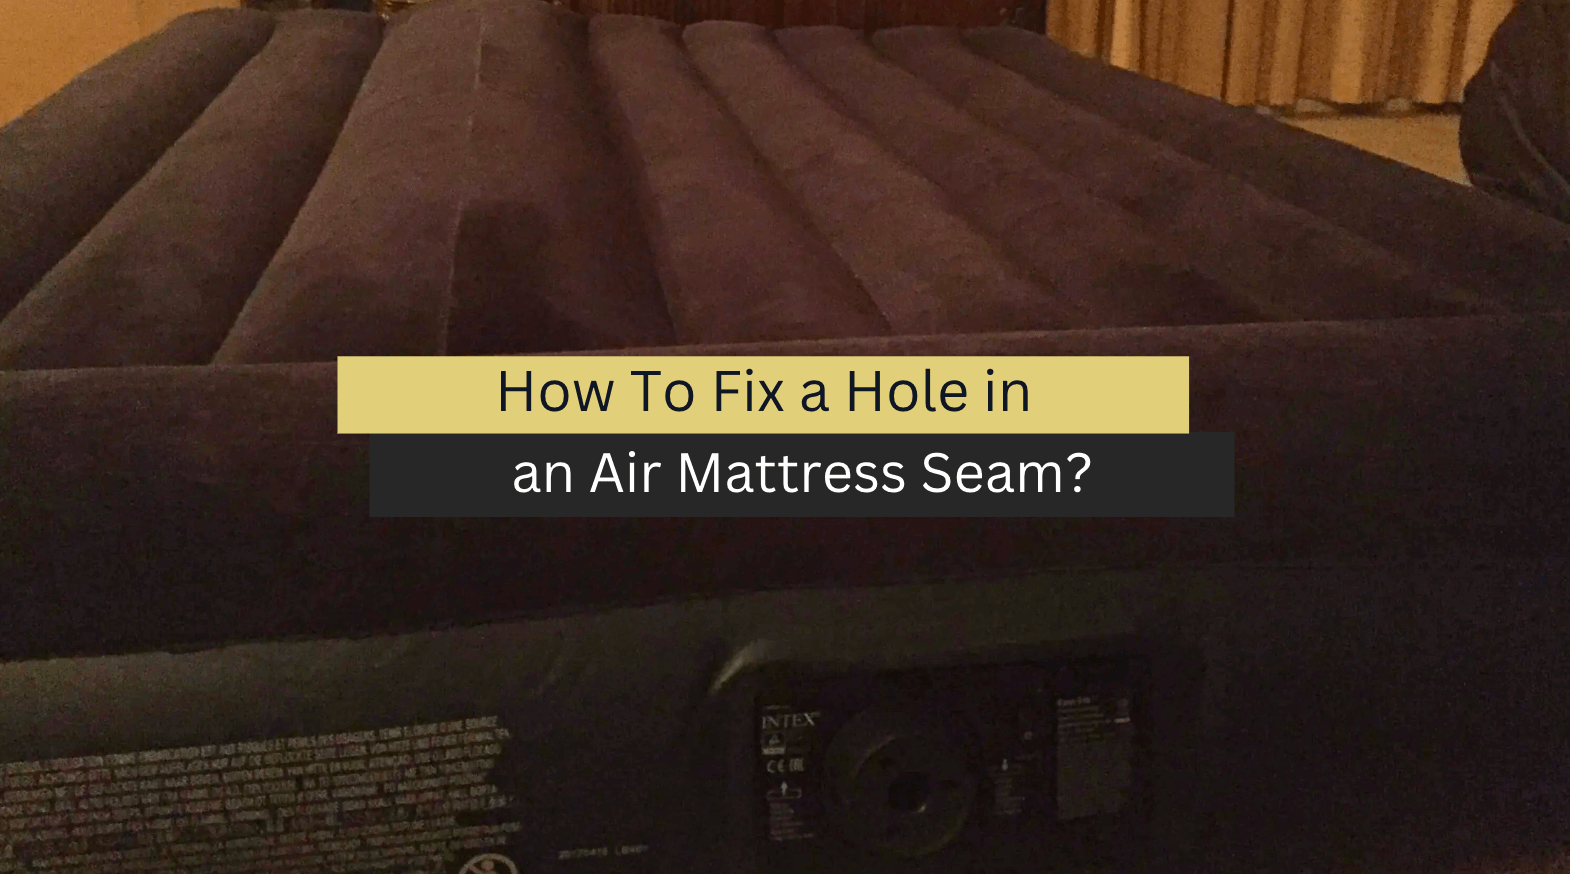 How To Fix a Hole in an Air Mattress Seam? (Step-By-Step Guide)